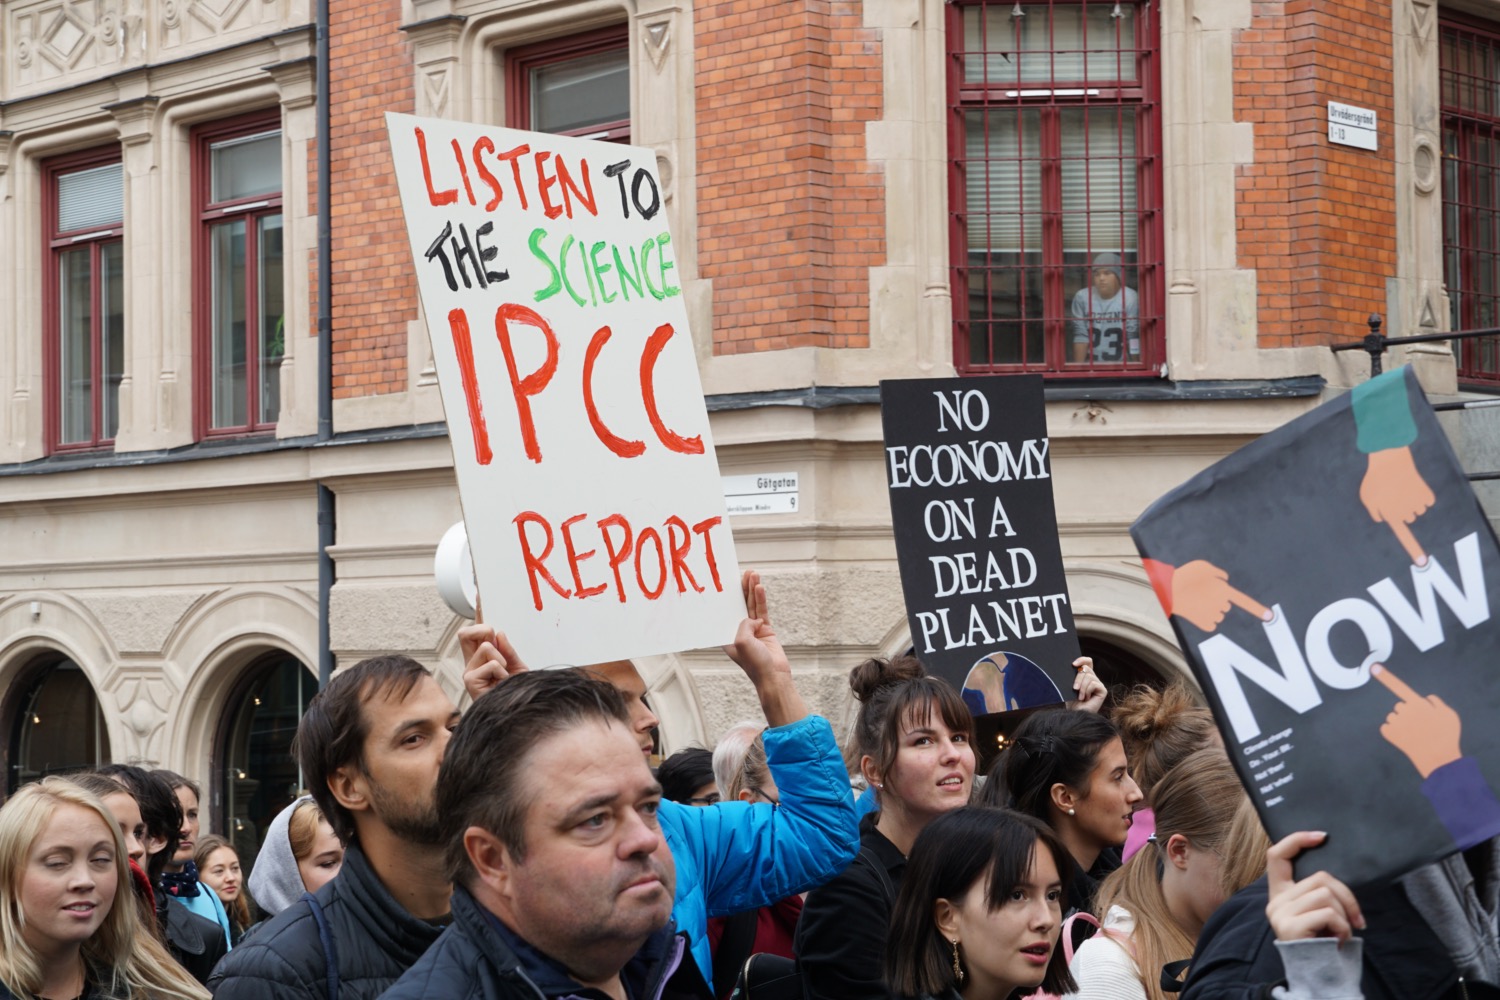 a crowd of protesters outside. three signs are being held up, they read "listen to the science ipcc report", "no economy on a dead planet", and "now""